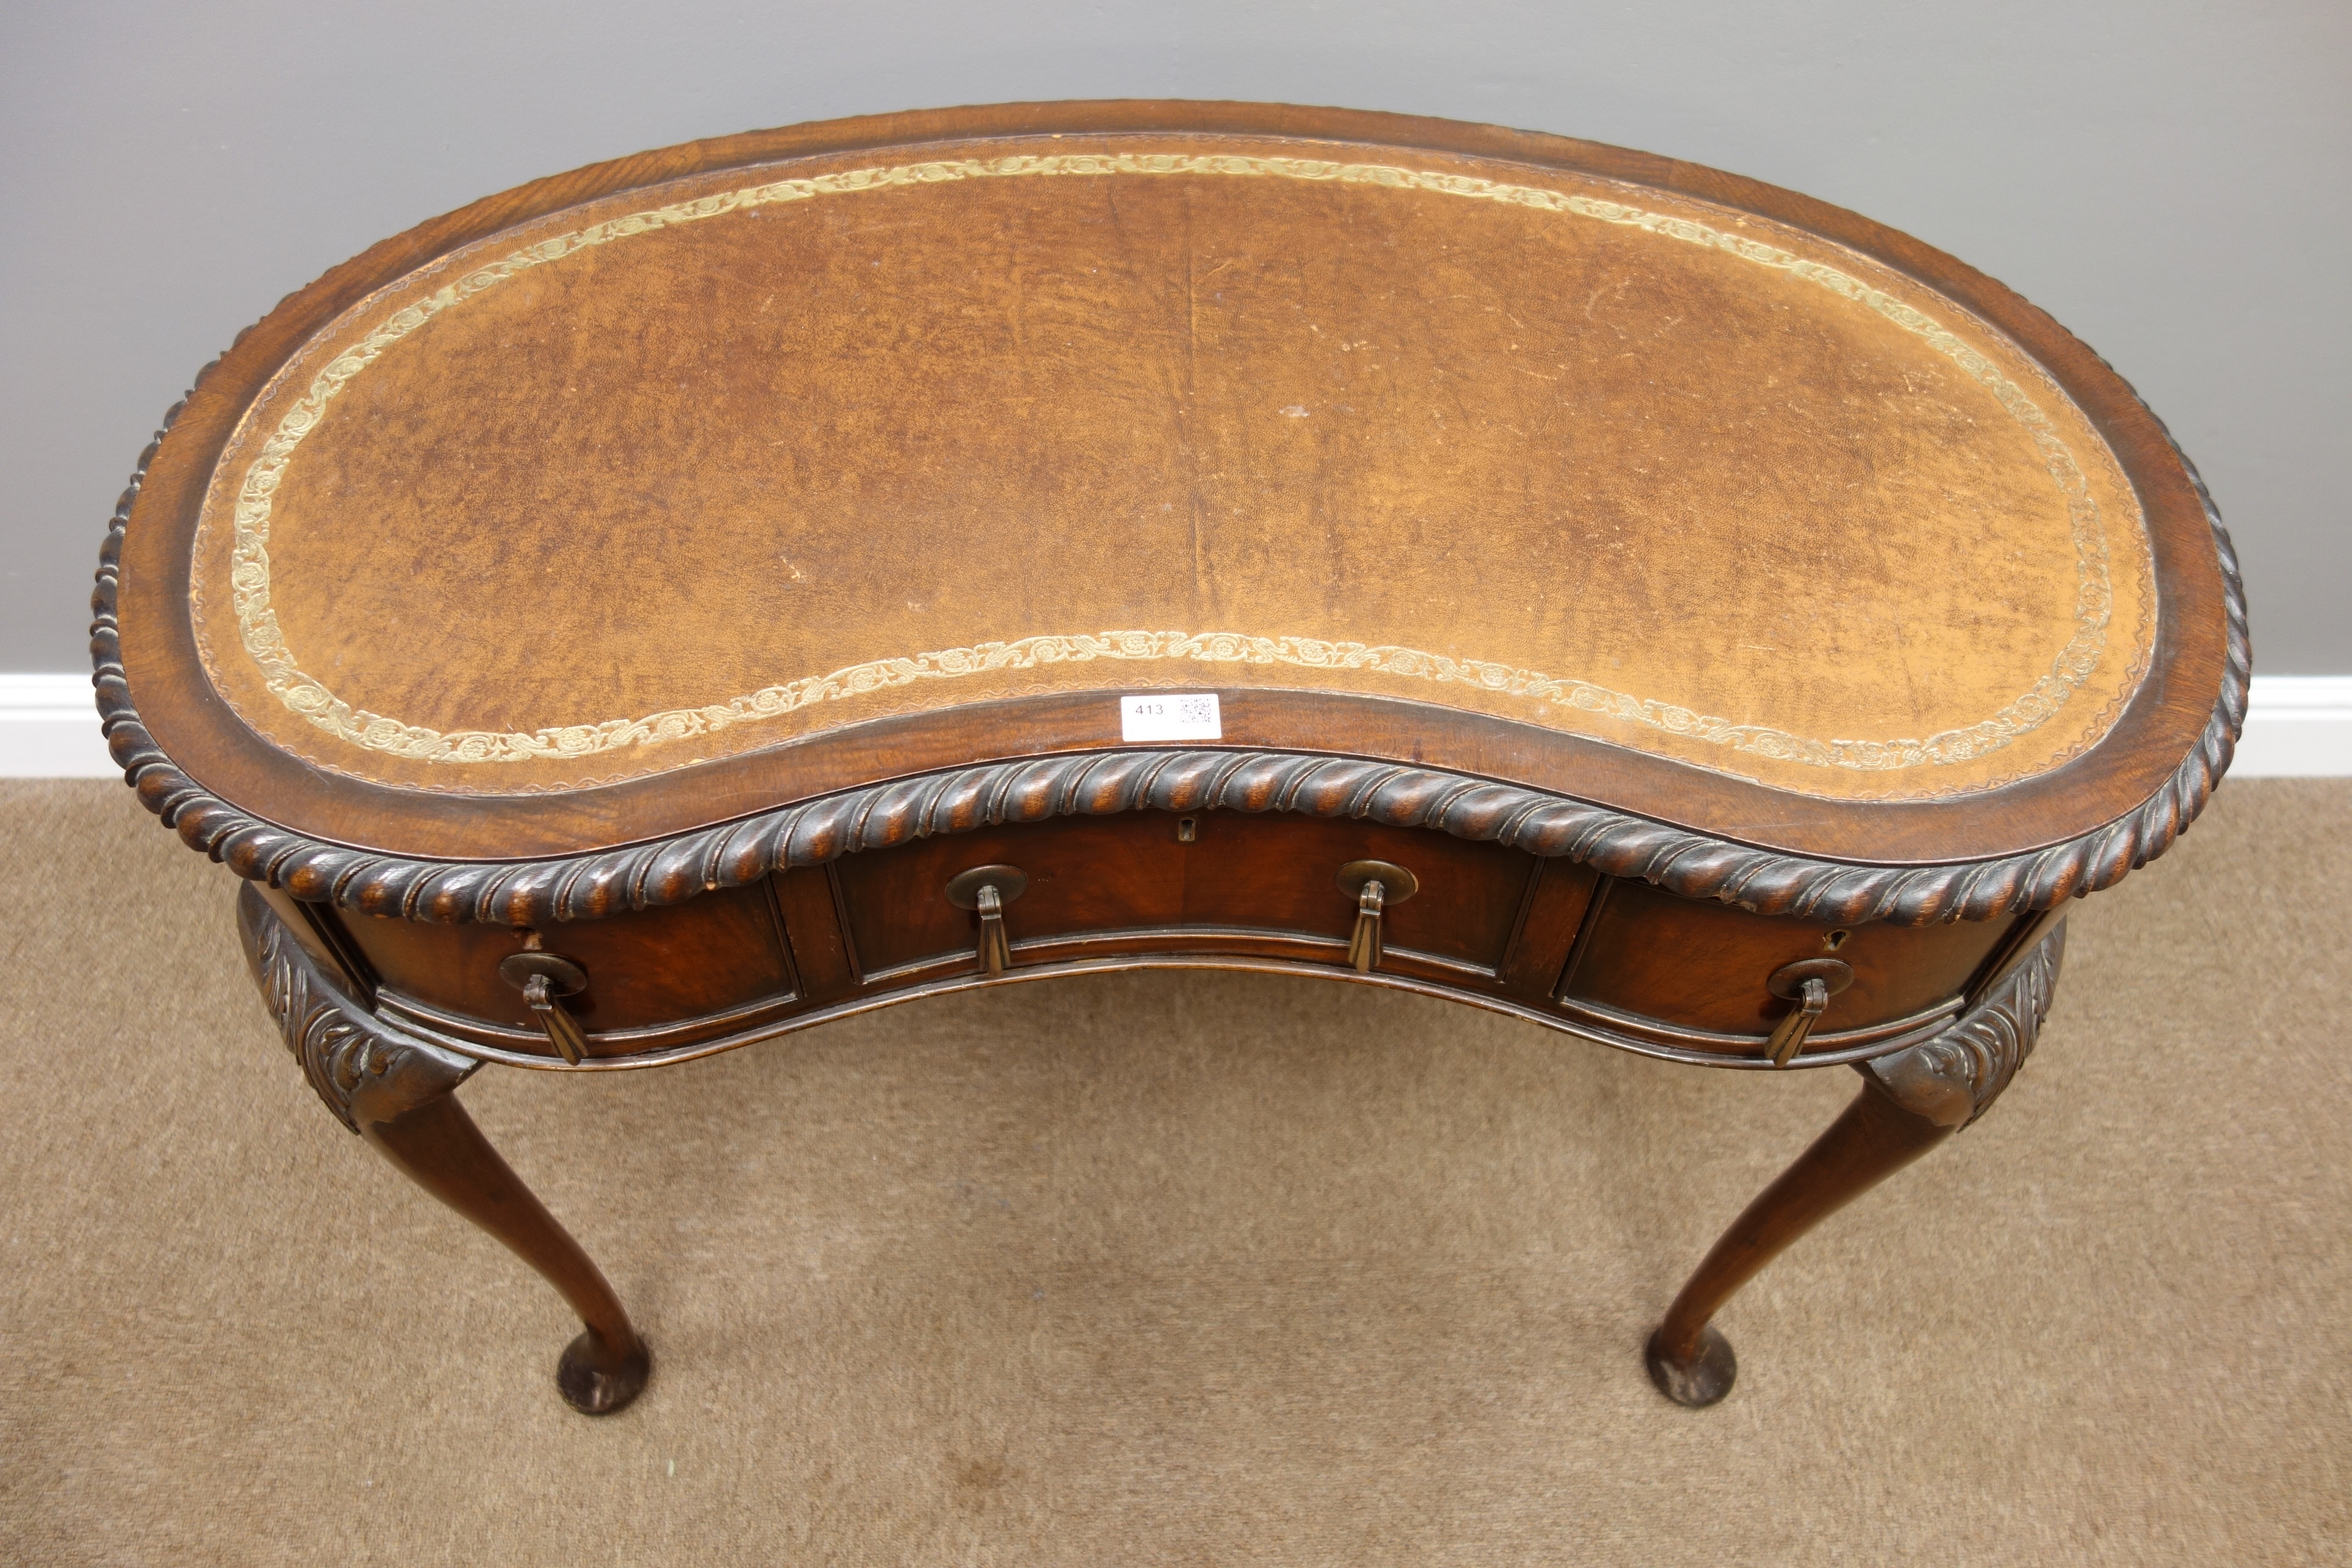 Early 20th century mahogany writing desk, kidney shaped top with gadroon moulding, - Image 4 of 5